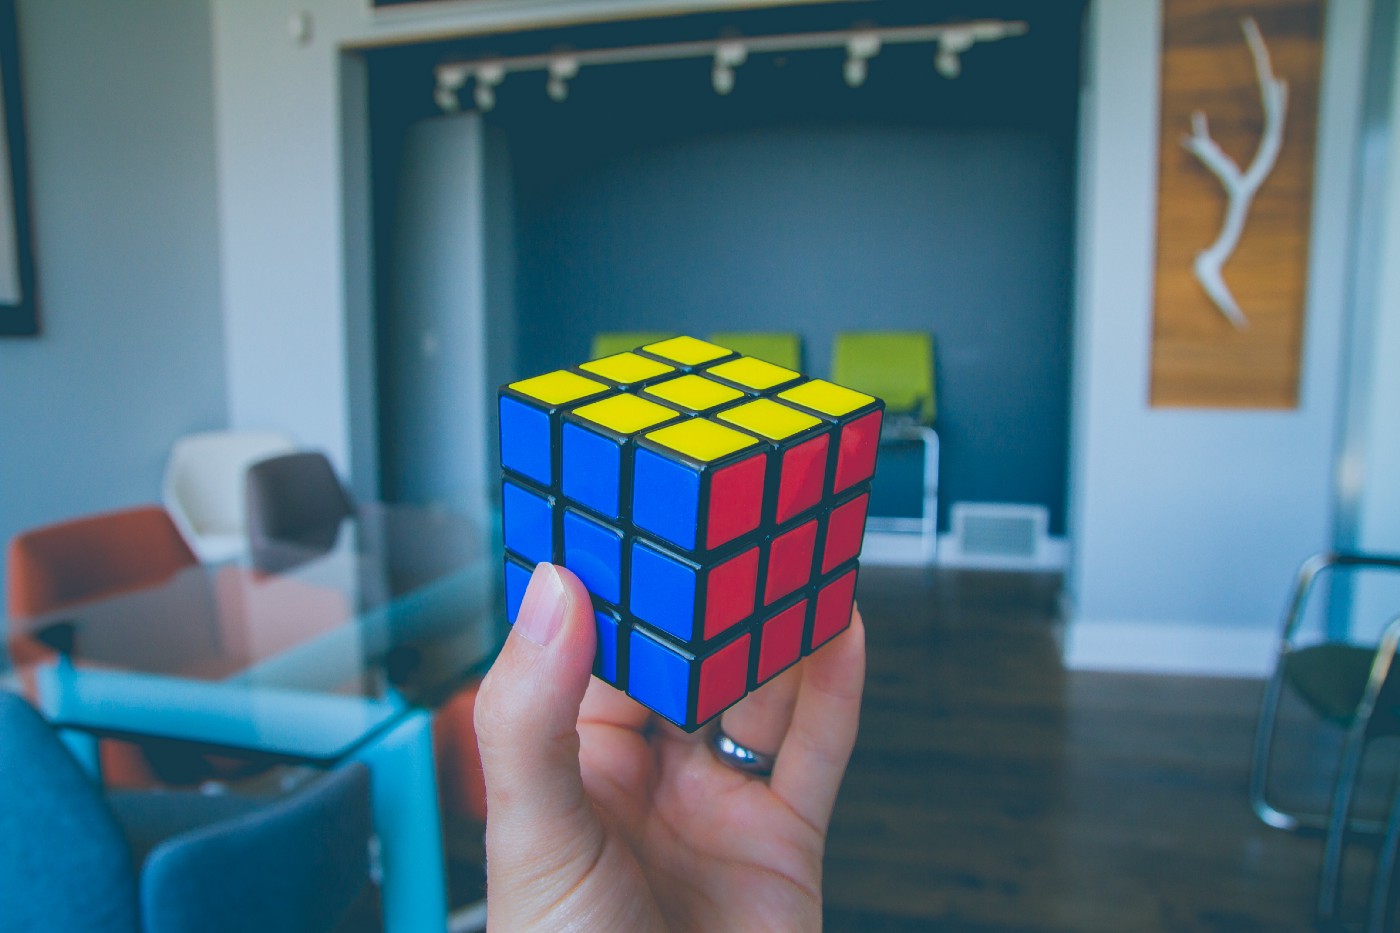 How to Solve a Rubik’s Cube?